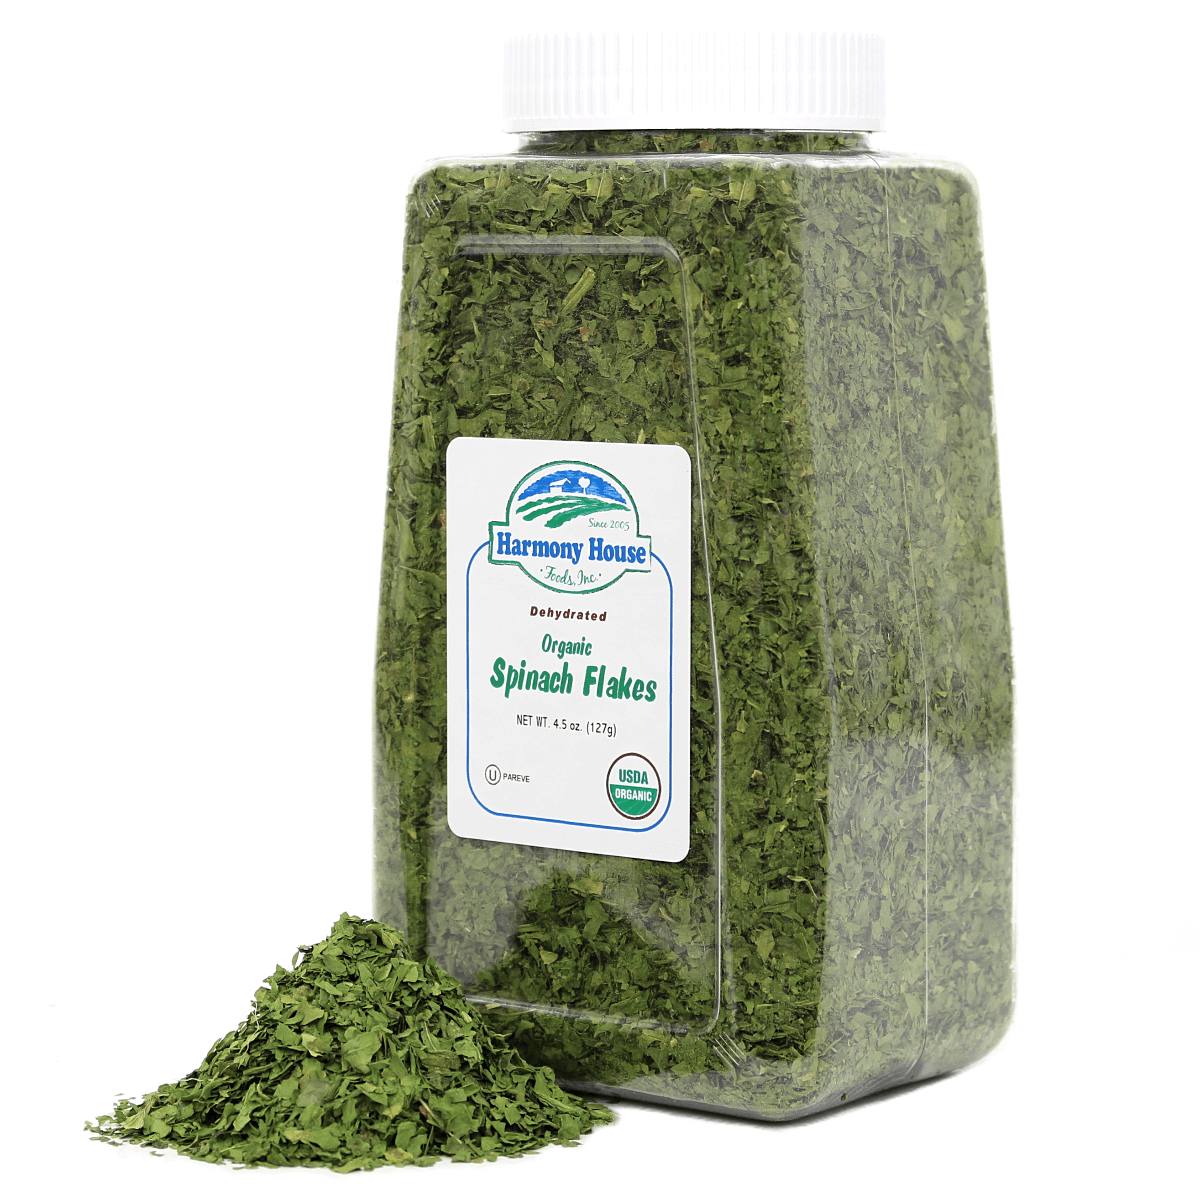 A jar of organic dried spinach flakes.